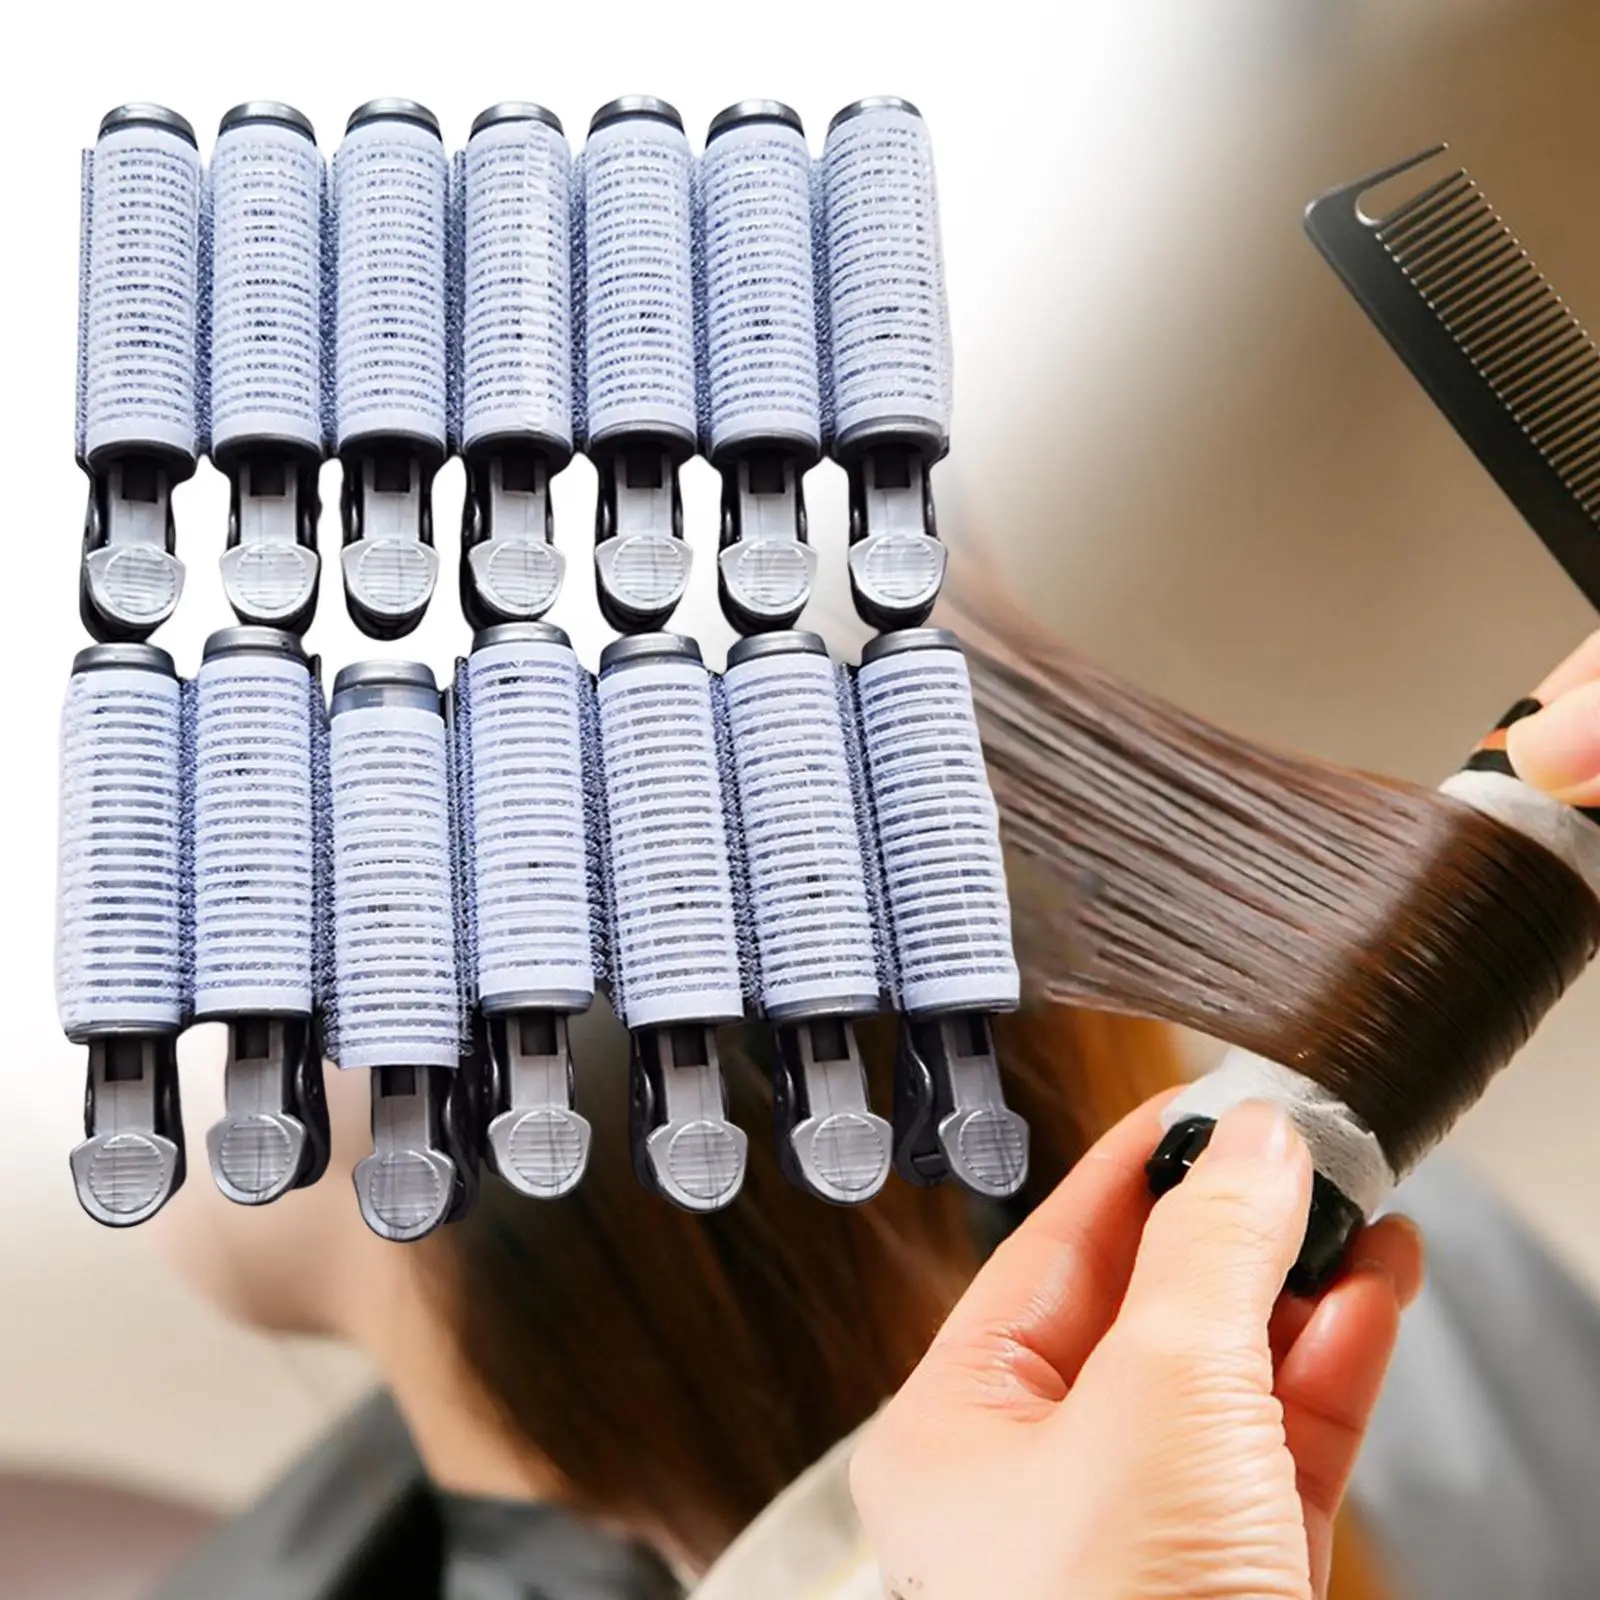 14Pcs Cold Wave Hair Roller DIY Curling Tool Cold Ironing Hair Tools for Barbershop Ironed The Curling Iron for Medium Hair Girl